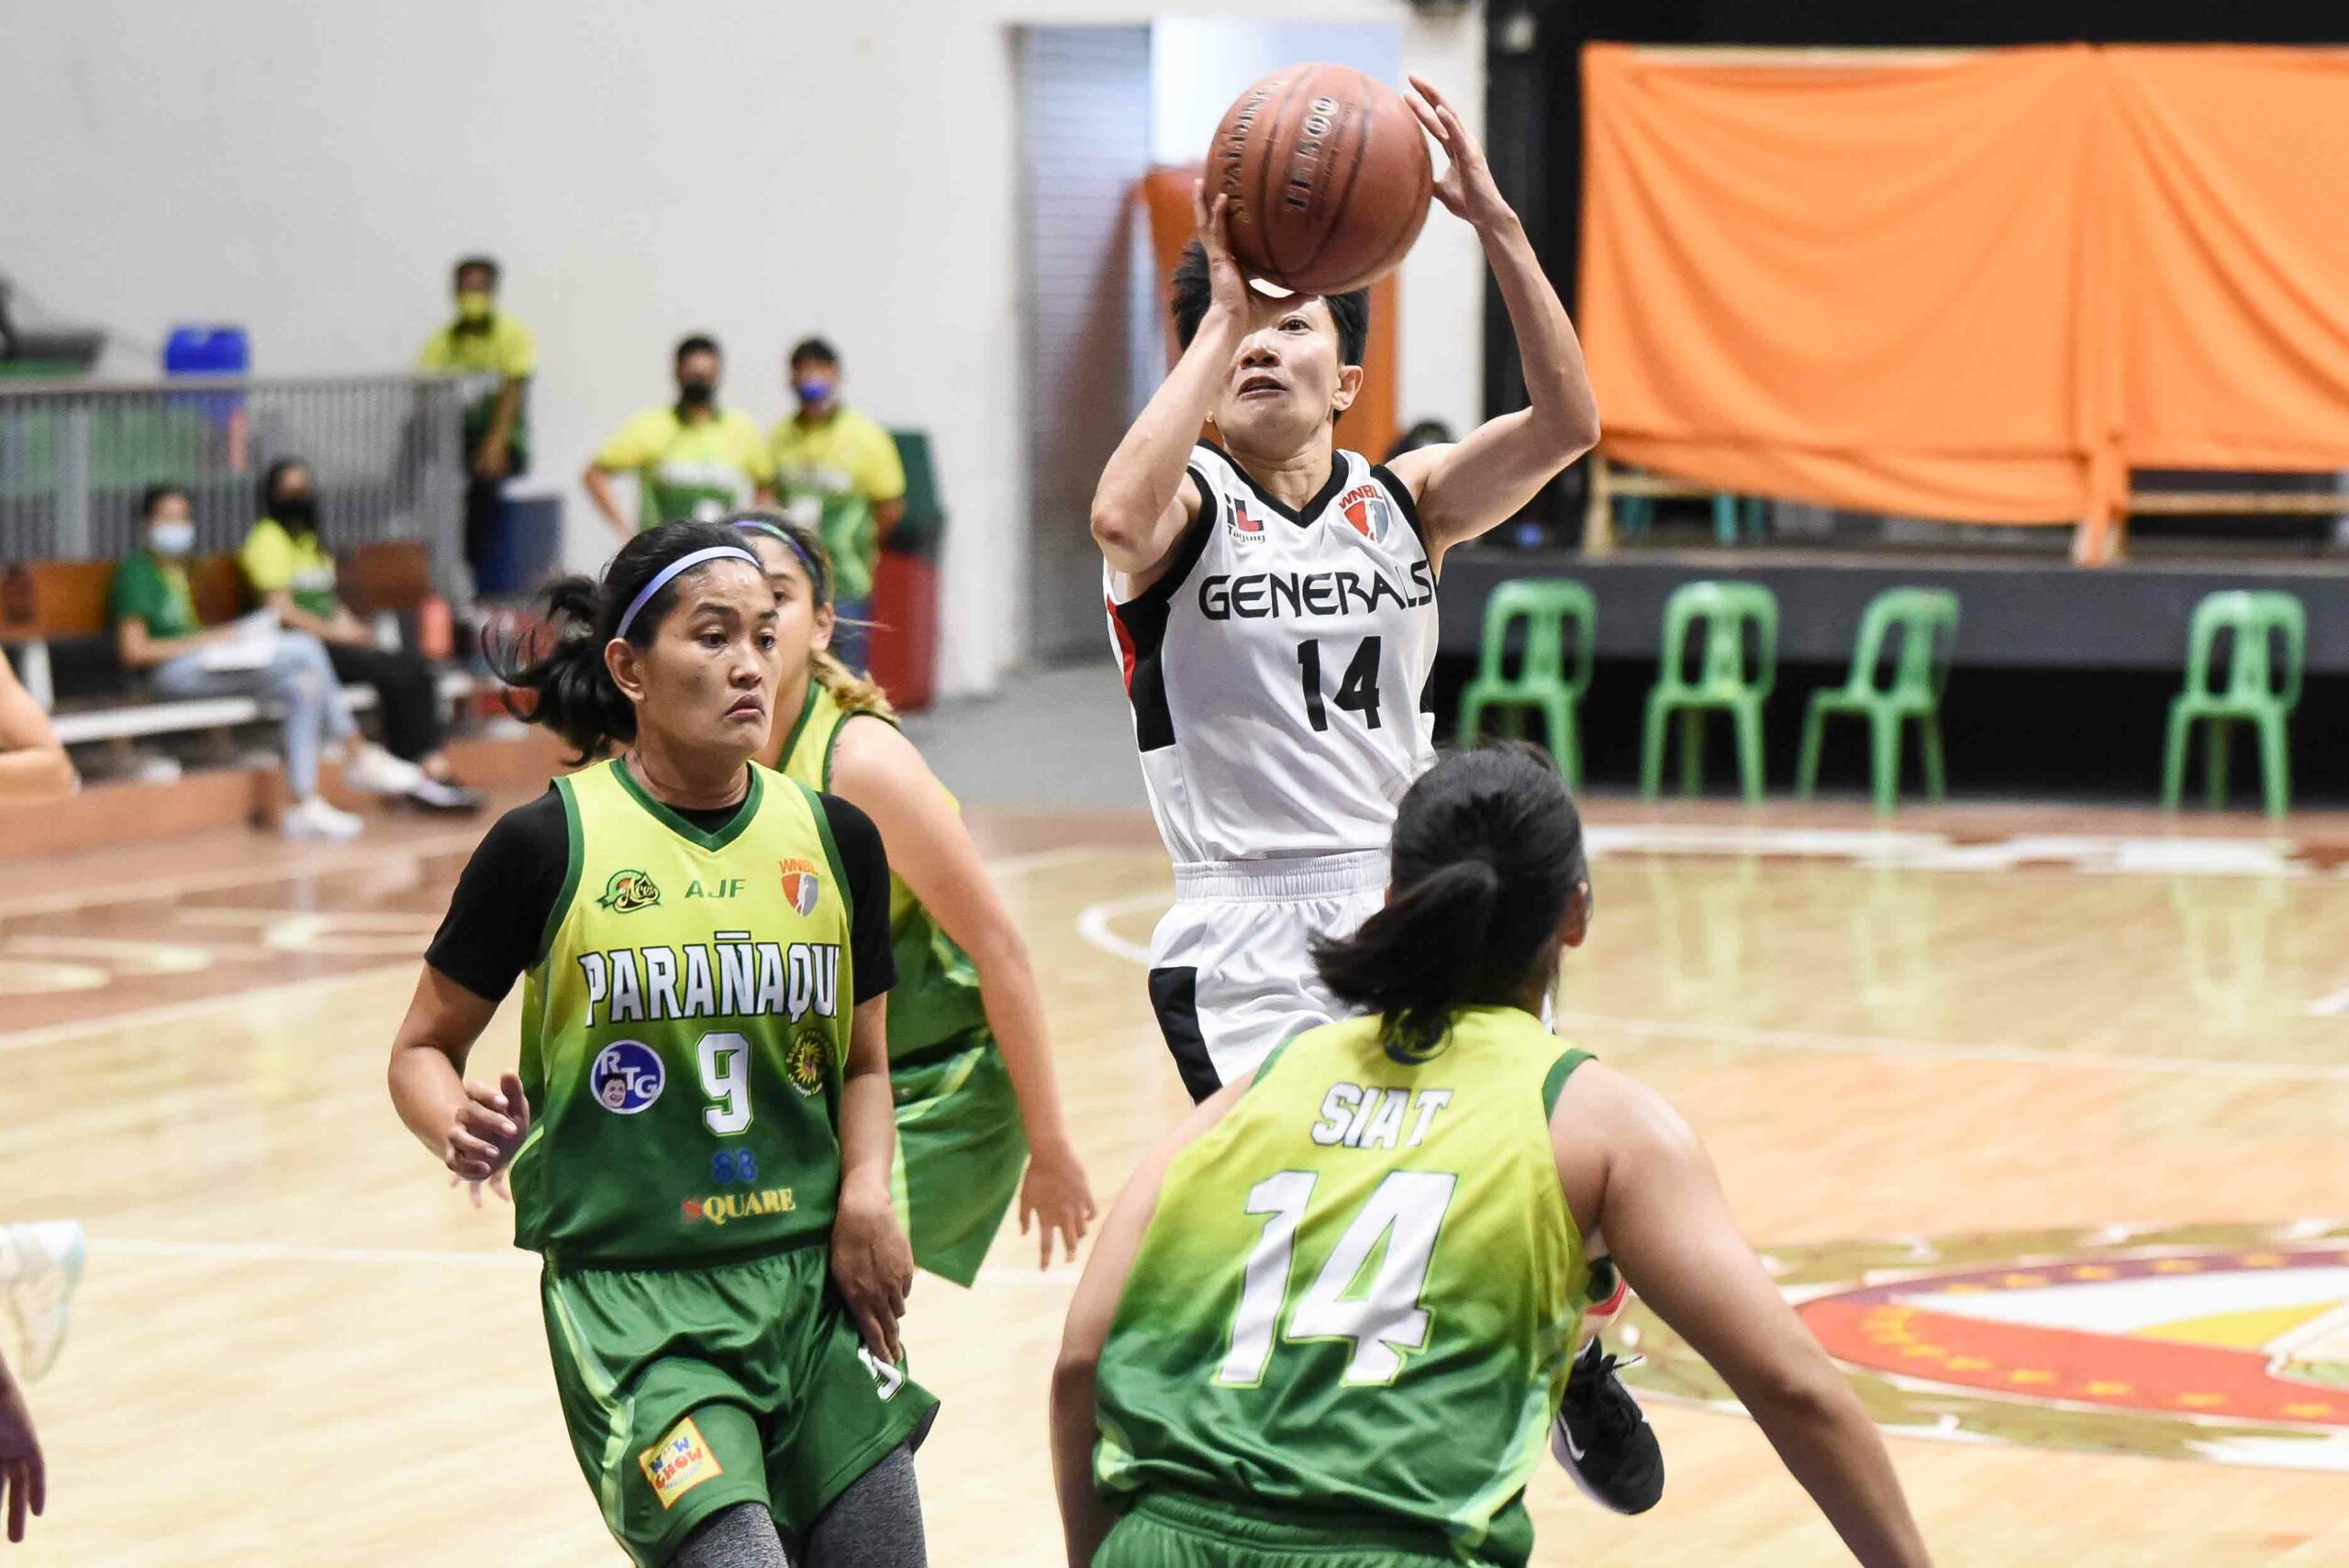 2021-Pia-WNBL-Taguig-vs-Paranaque-Marichu-Bacaro-Lady-Generals-scaled Paranaque moves on verge of WNBL title Basketball NBL News  - philippine sports news